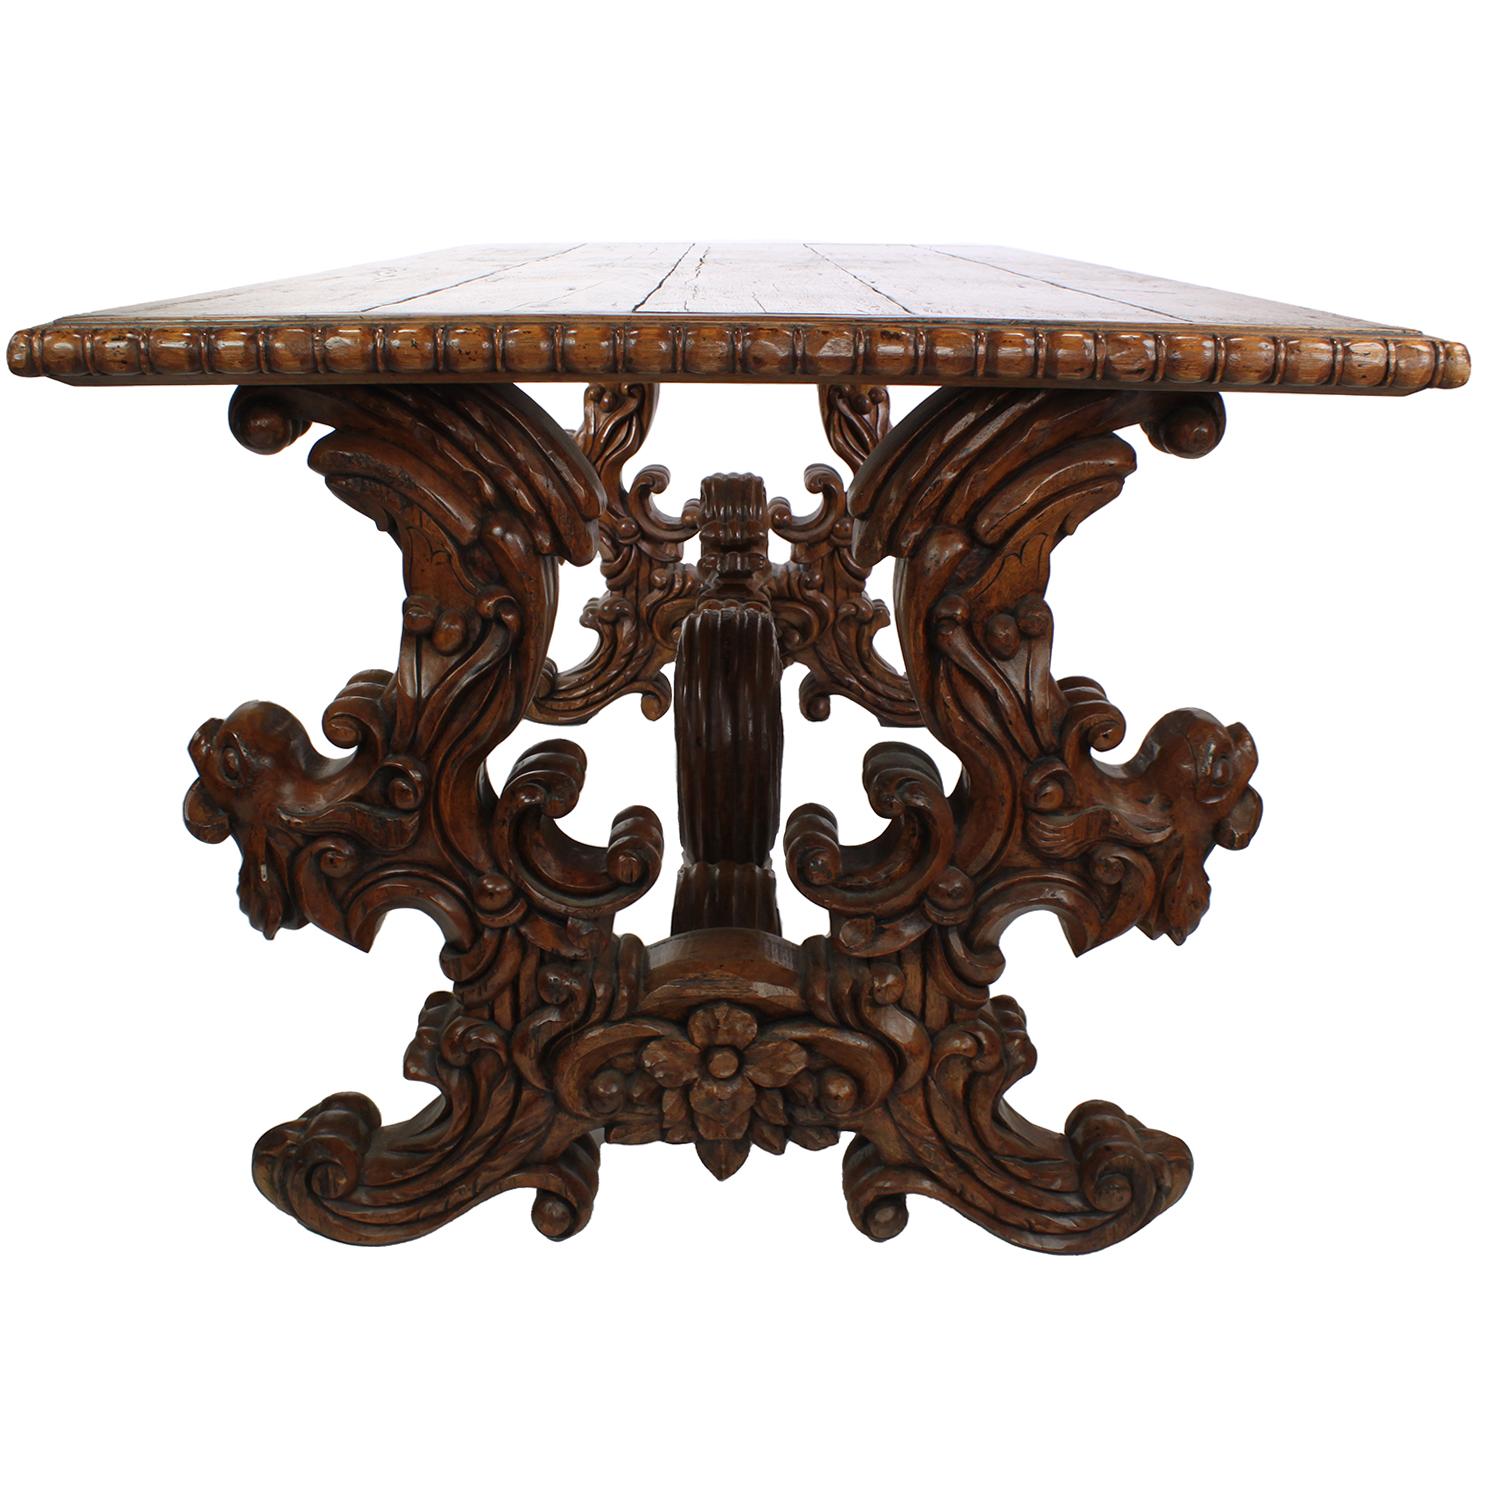 Fruitwood Baroque Revival Style Carved Wood Tavern or Farm Dining Pedestal Table For Sale